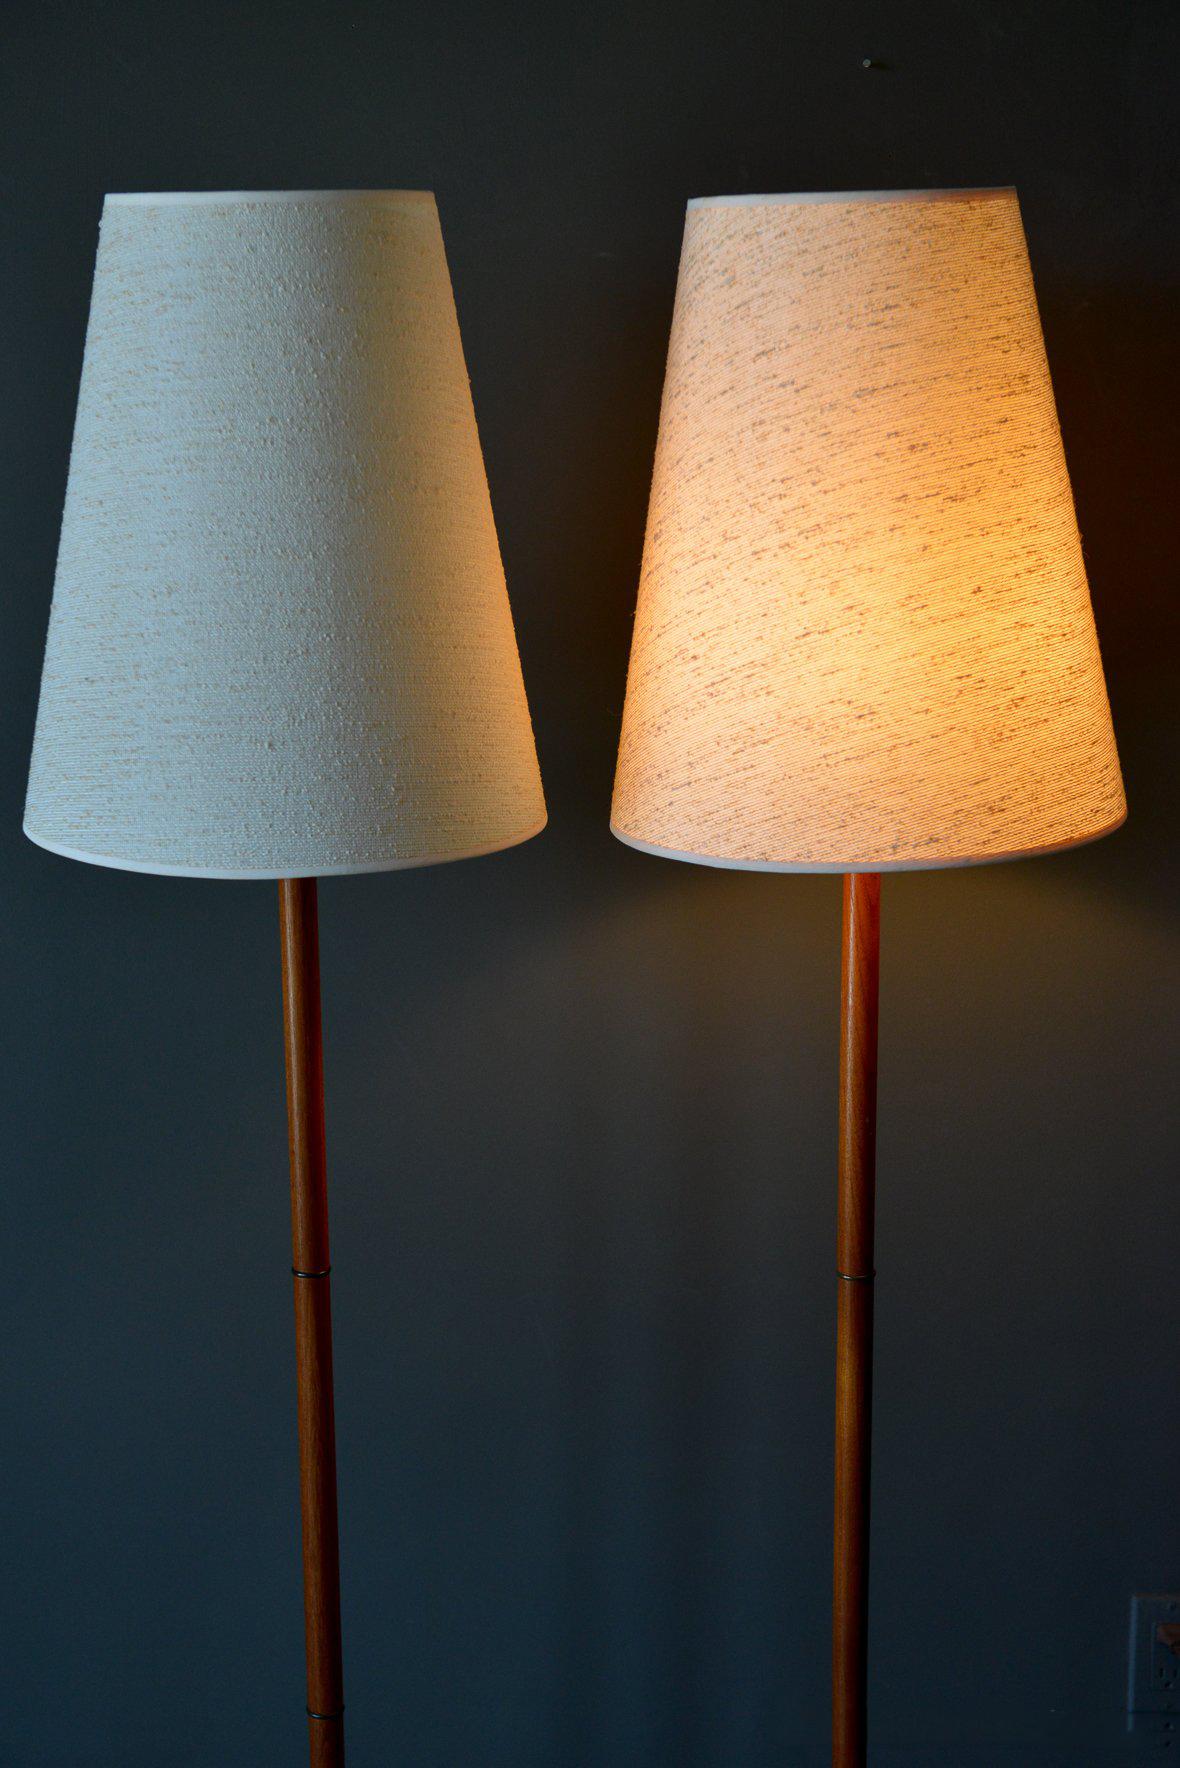 Pair of Danish teak floor lamps with original shades, circa 1960. Beautiful teak bases with brass ring inserts on the neck. Original wiring and original linen shades in excellent condition.

Lamps measure 62.5